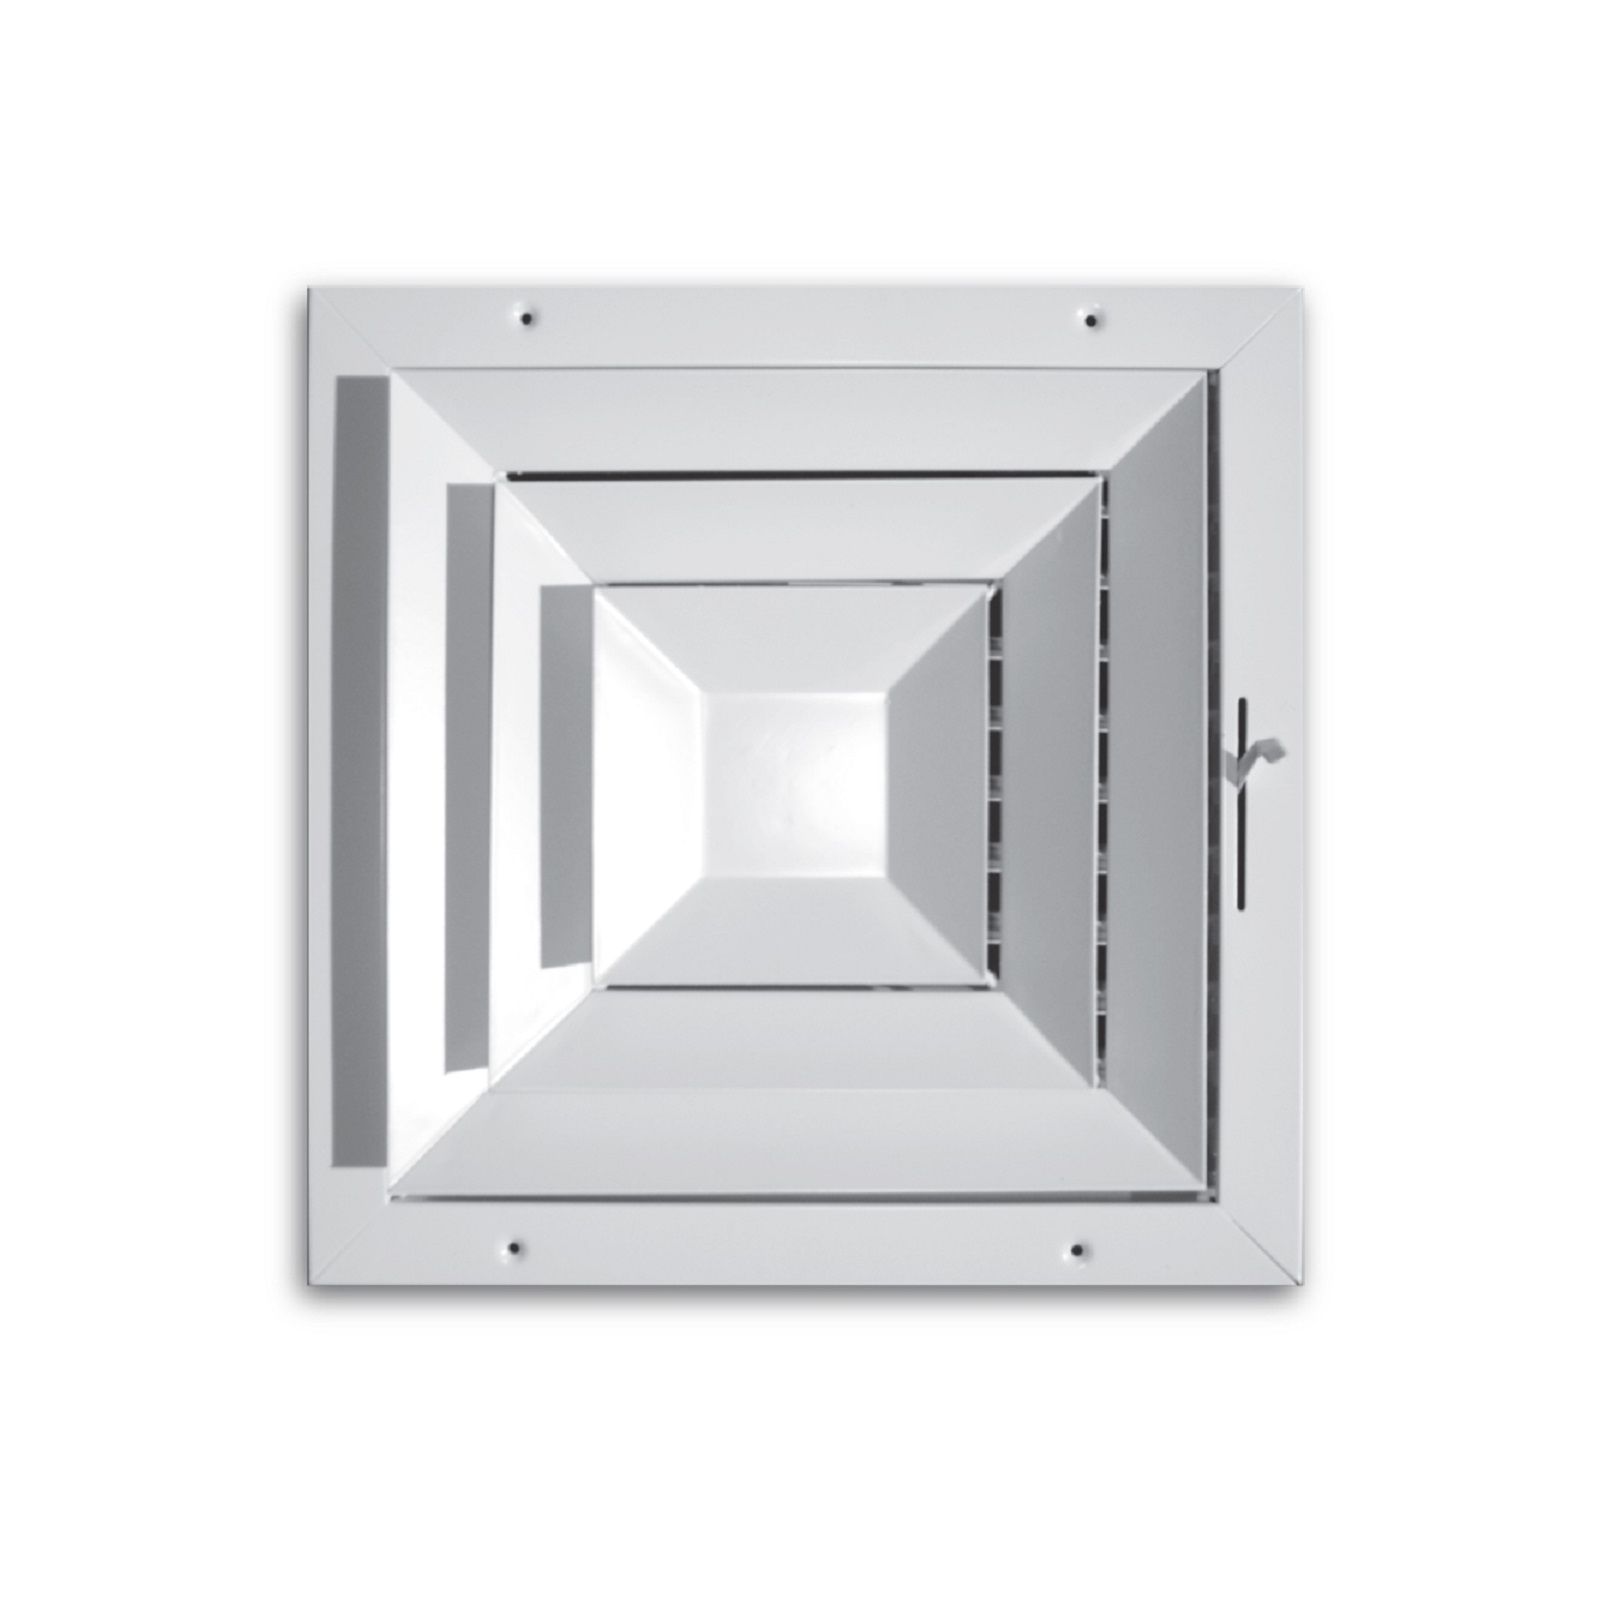 TRUaire 560M 10X10 - High Capacity Step-Down Square Ceiling Directional Diffuser, White, 10" X 10"